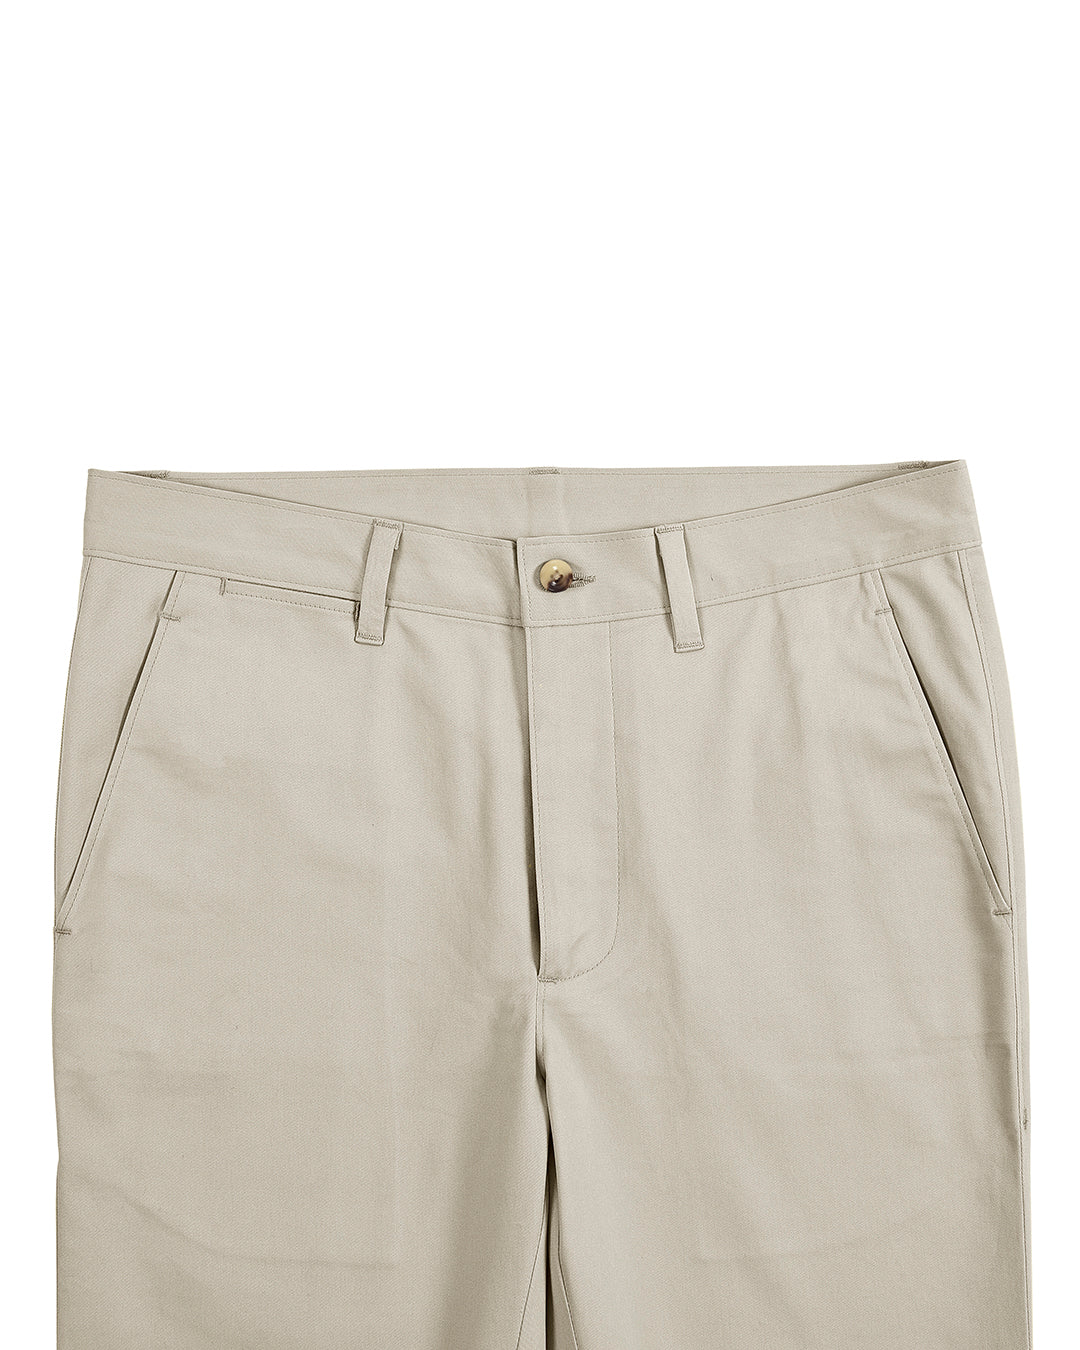 Front view of custom Genoa Chino pants for men by Luxire in light beige